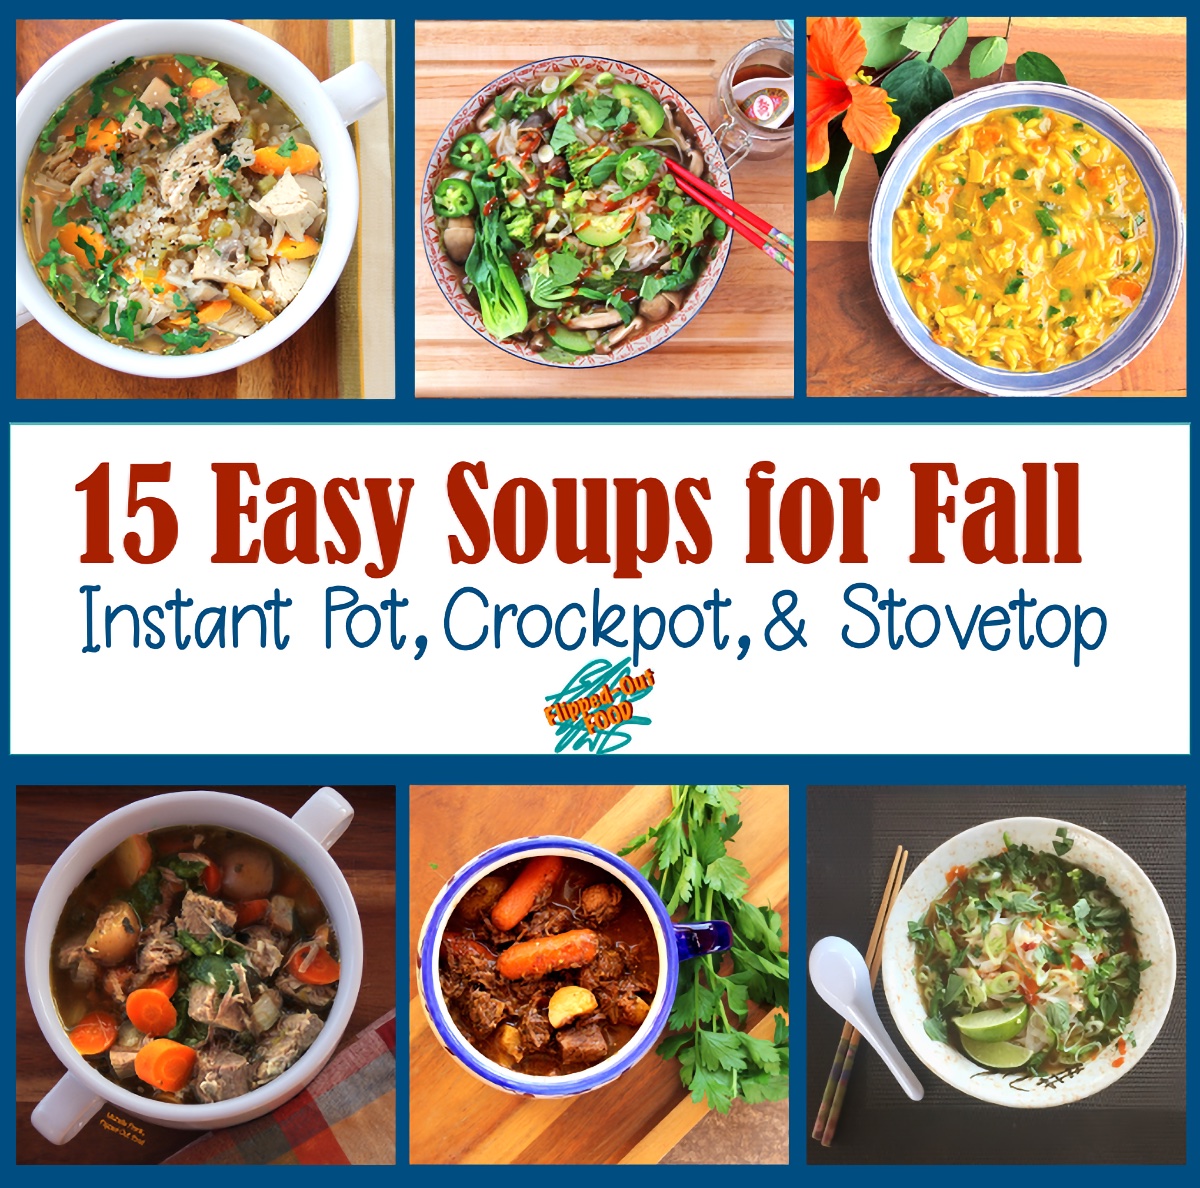 Easy Soups for Fall: a collage of soups featuring (clockwise from upper left): Soul-Warming Barley Vegetable Soup, Instant-Pot Vegetable Pho, Lemon-Turmeric Chicken Orzo Soup, Pressure-Cooker Pho Ga, Make-Ahead Irish Guinness Stew, and Caldillo (Green Chile Pork Stew).